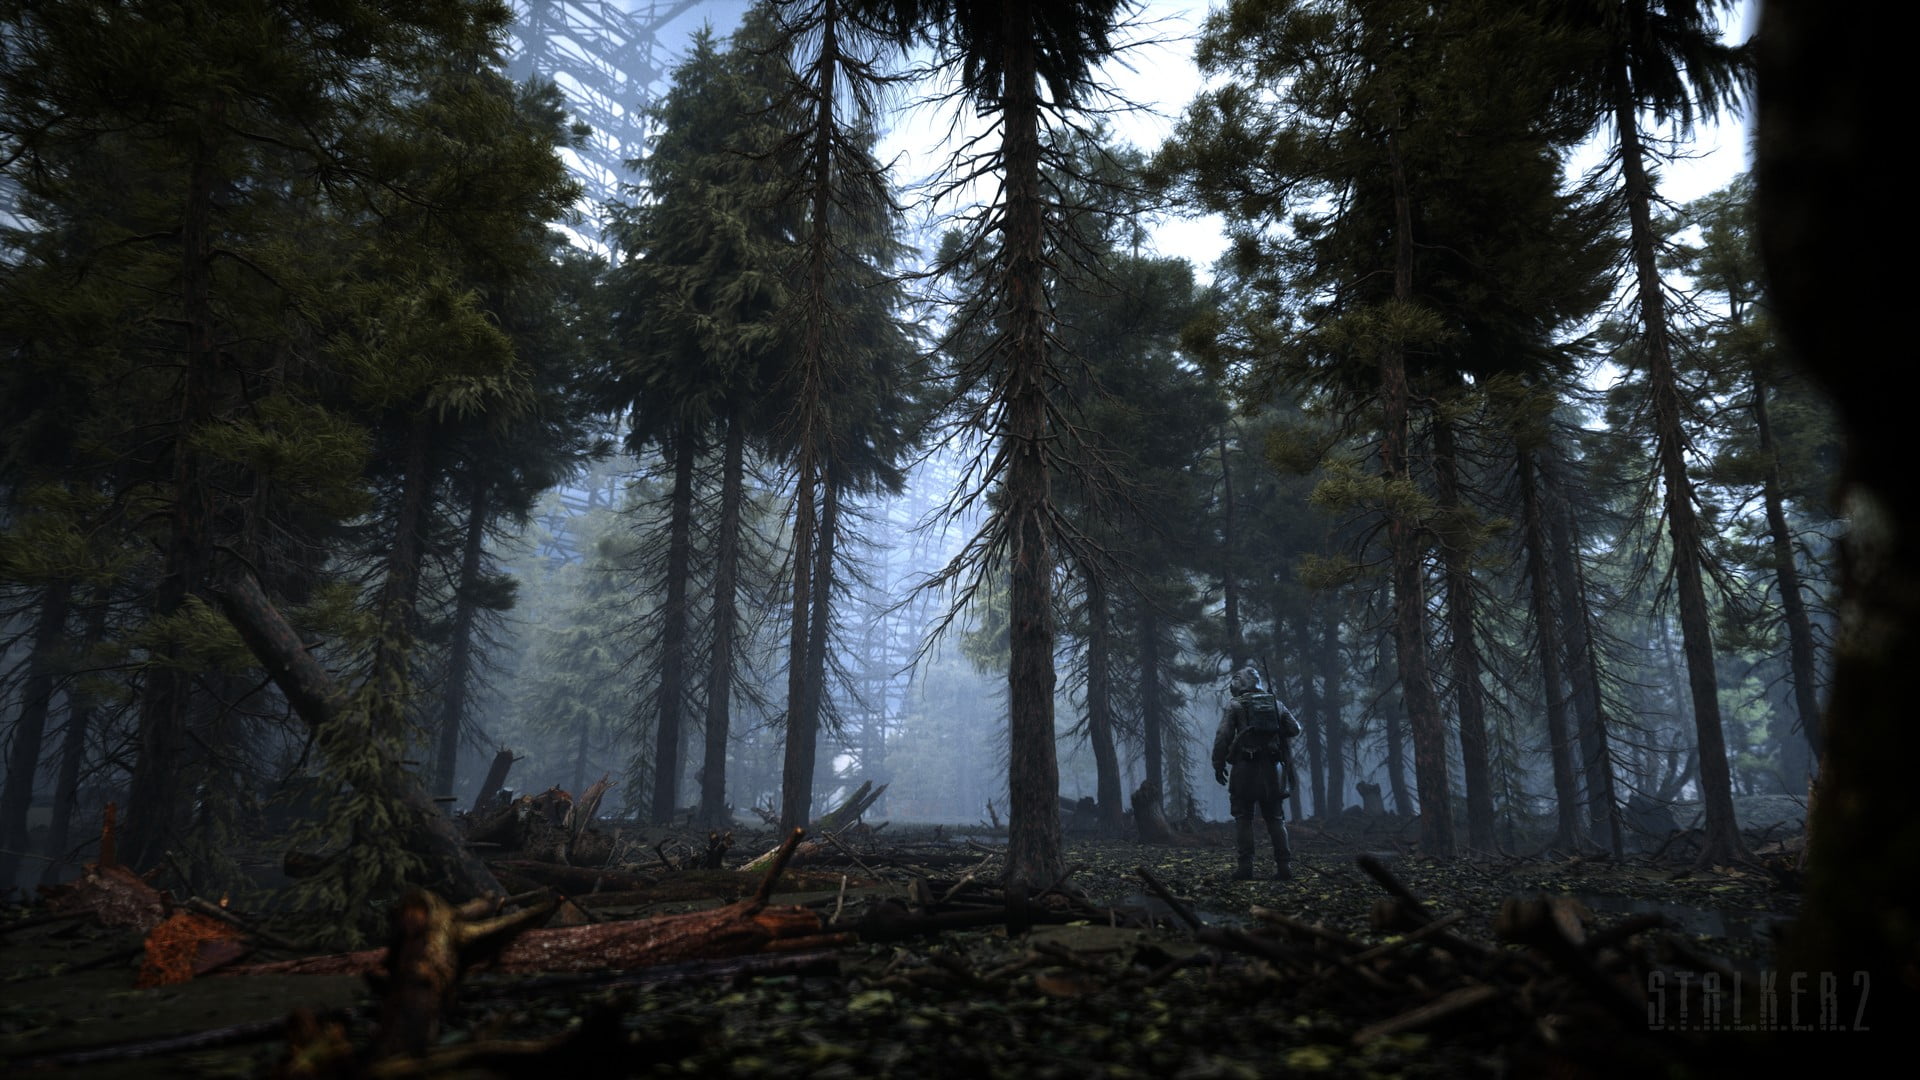 S.T.A.L.K.E.R. 2, Chernobyl, gas masks, forest, trees